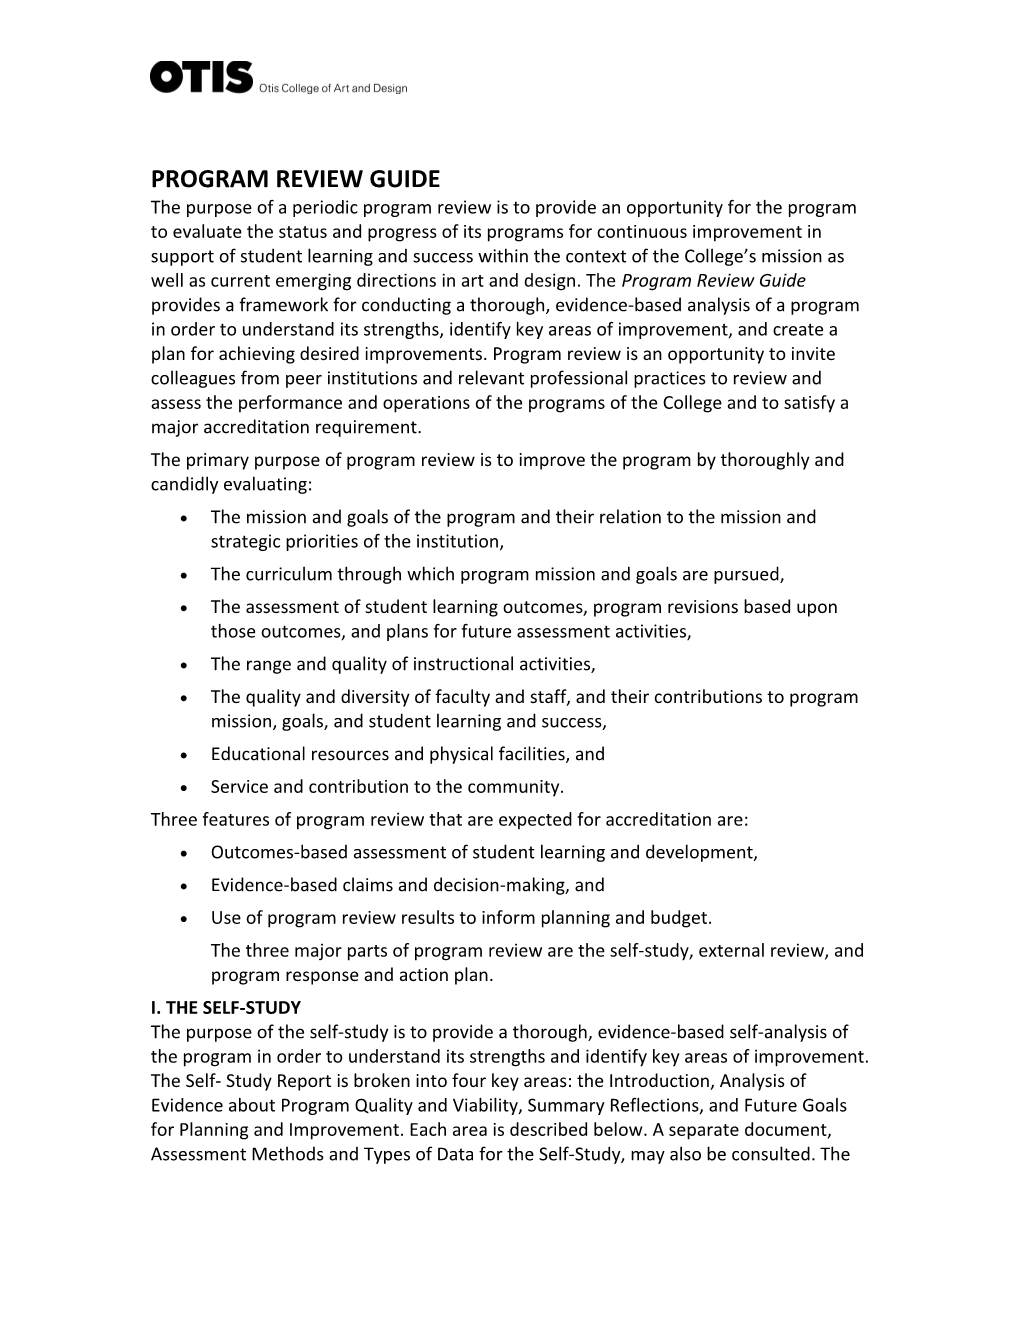 PROGRAM REVIEW GUIDE the Purpose of a Periodic Program Review Is to Provide an Opportunity